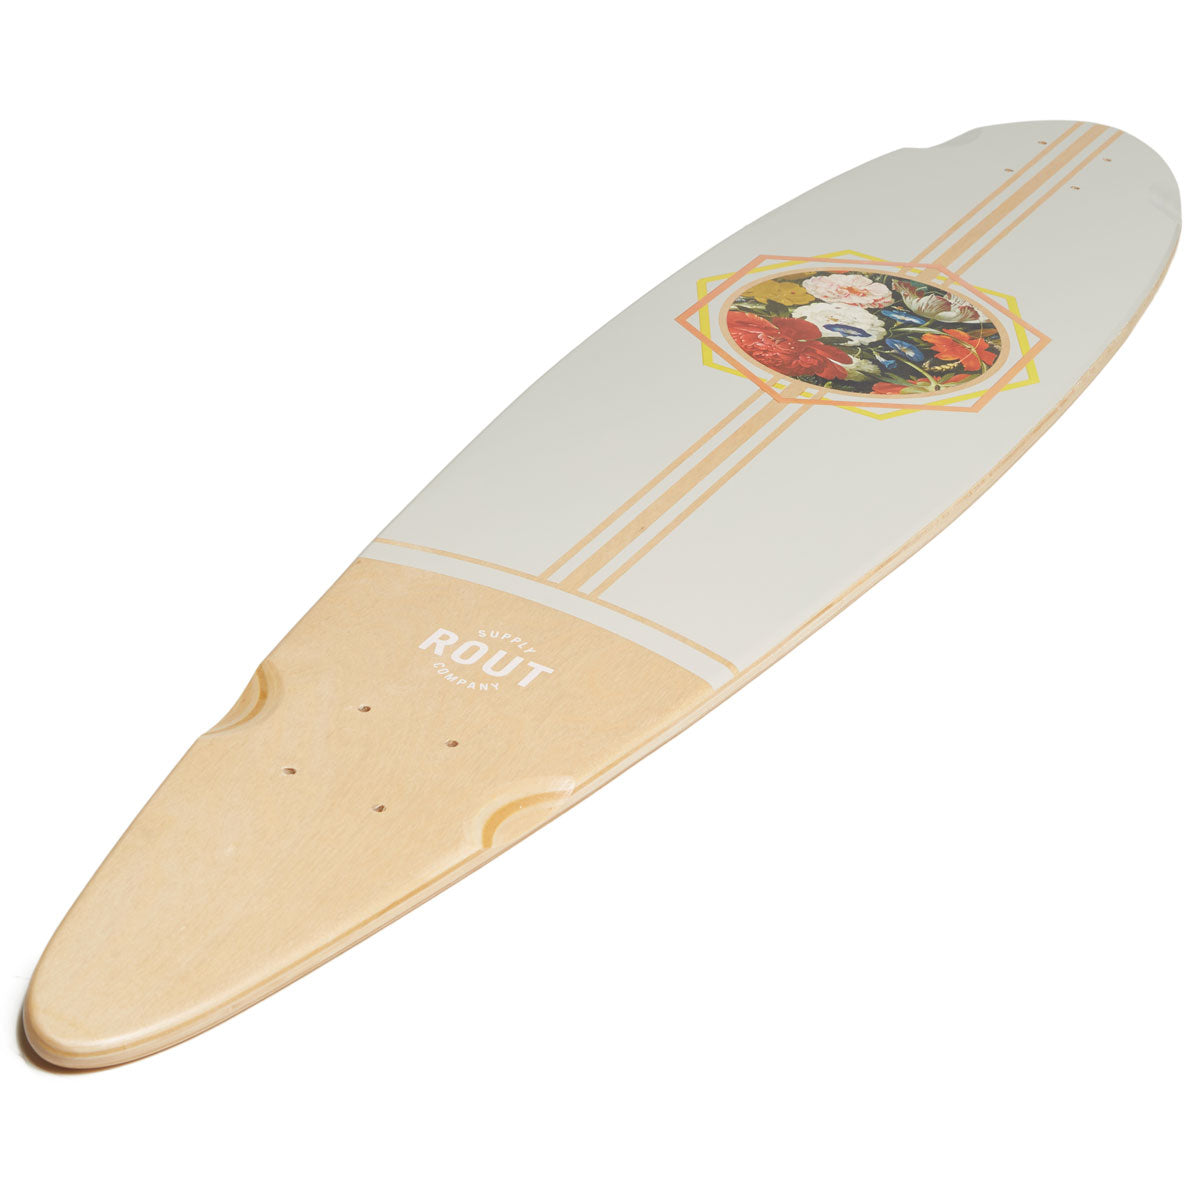 Rout Floral Pintail Longboard Deck image 4